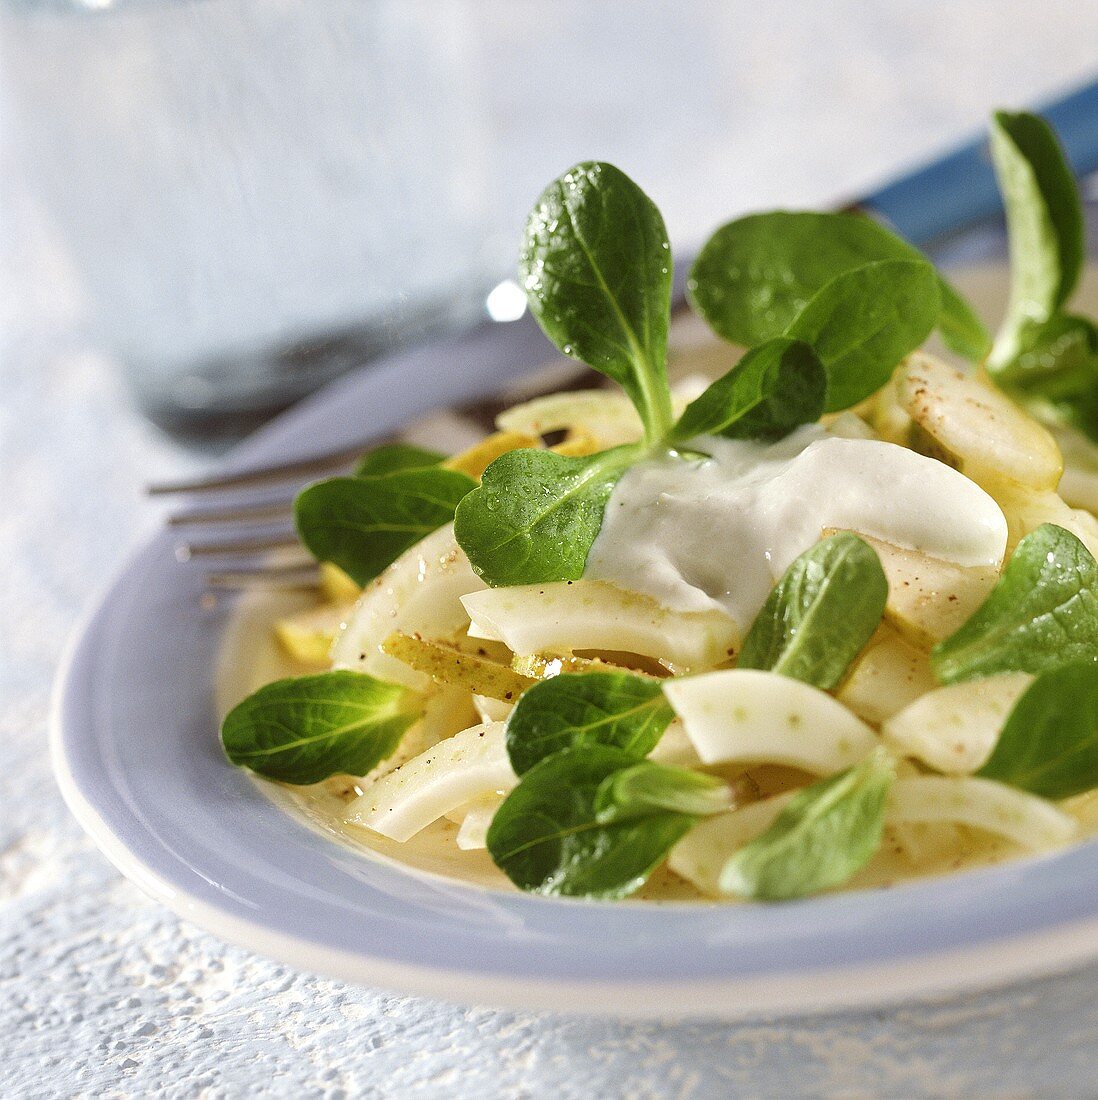 Fennel and pear salad with corn salad and sour cream